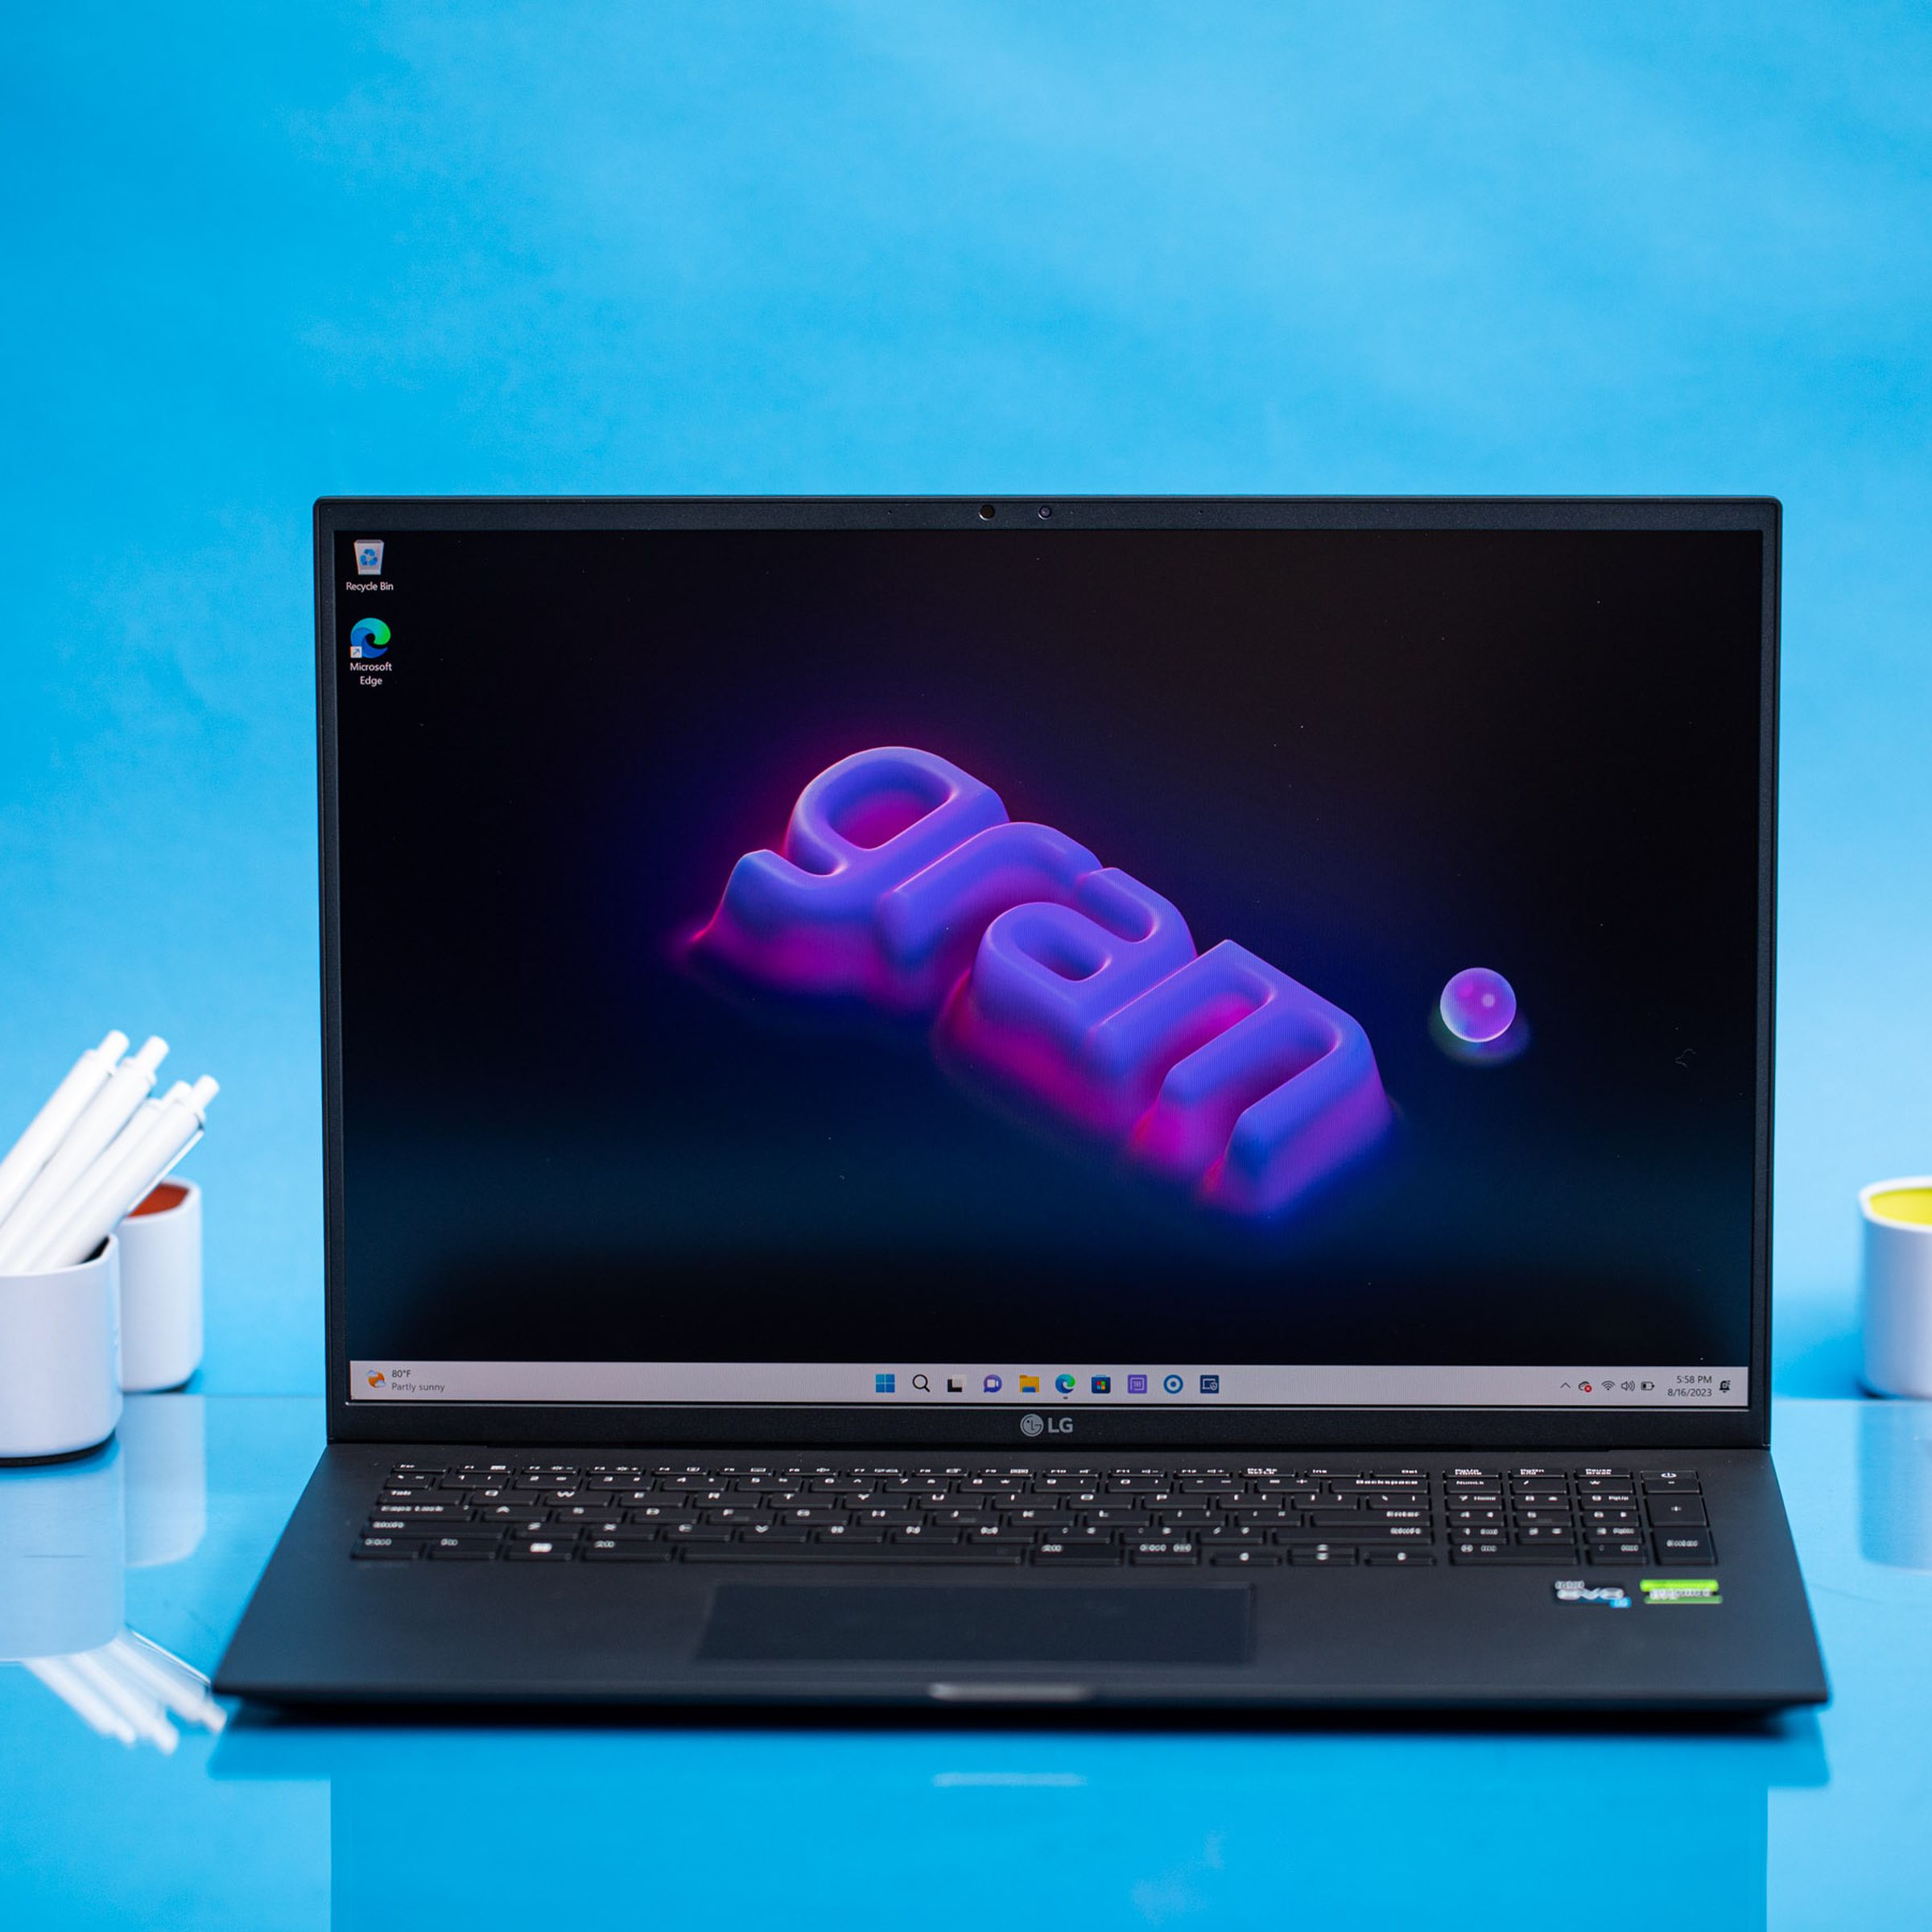 The LG Gram Pro 17 displaying a desktop background that has the Gram logo written in purple and pink.